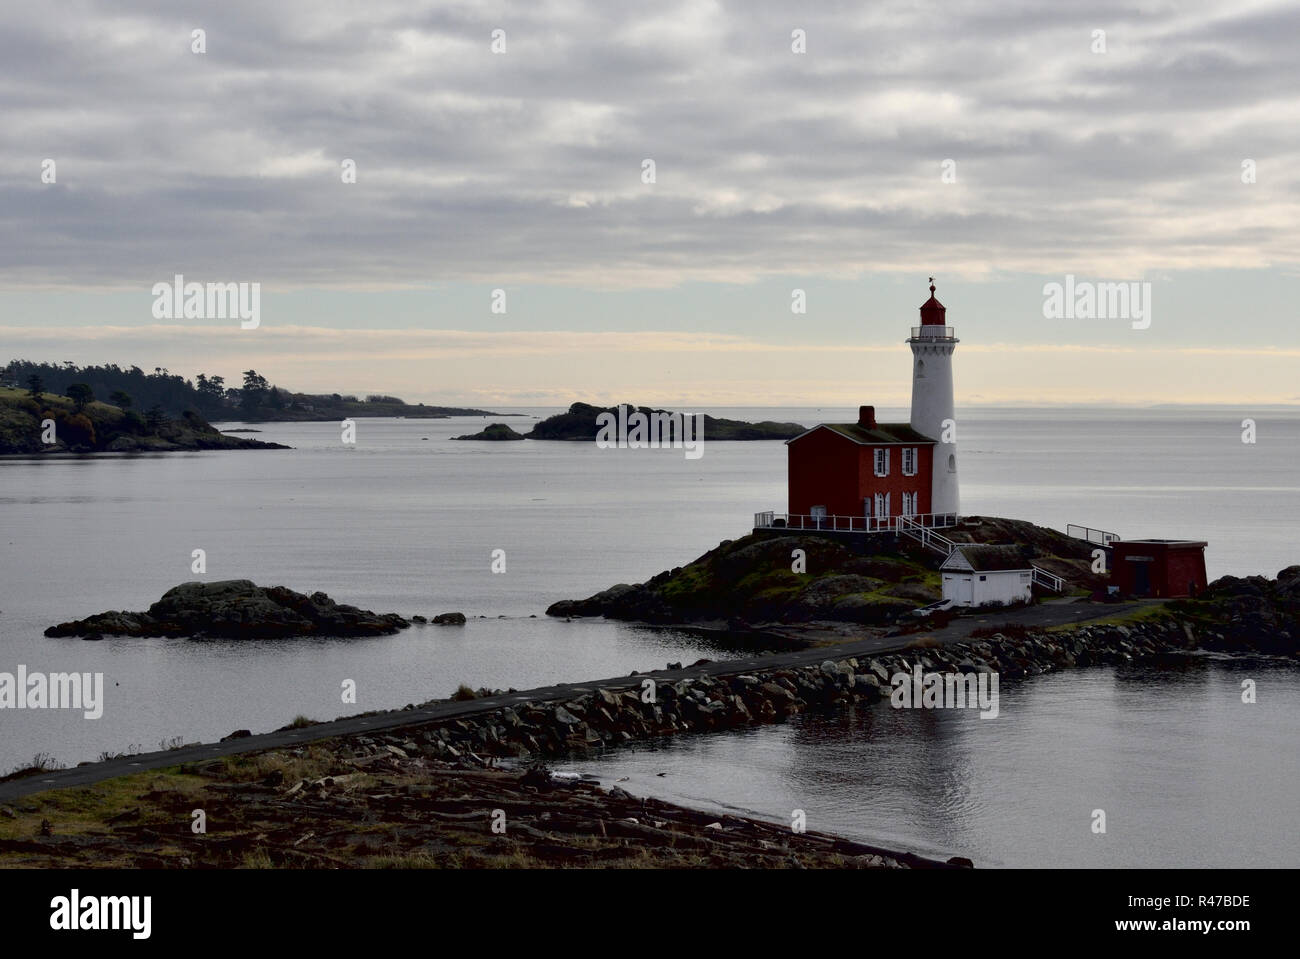 Historic Fisgard lighthouse at the entrance to Esquimalt Harbour and Royal Roads. Stock Photo